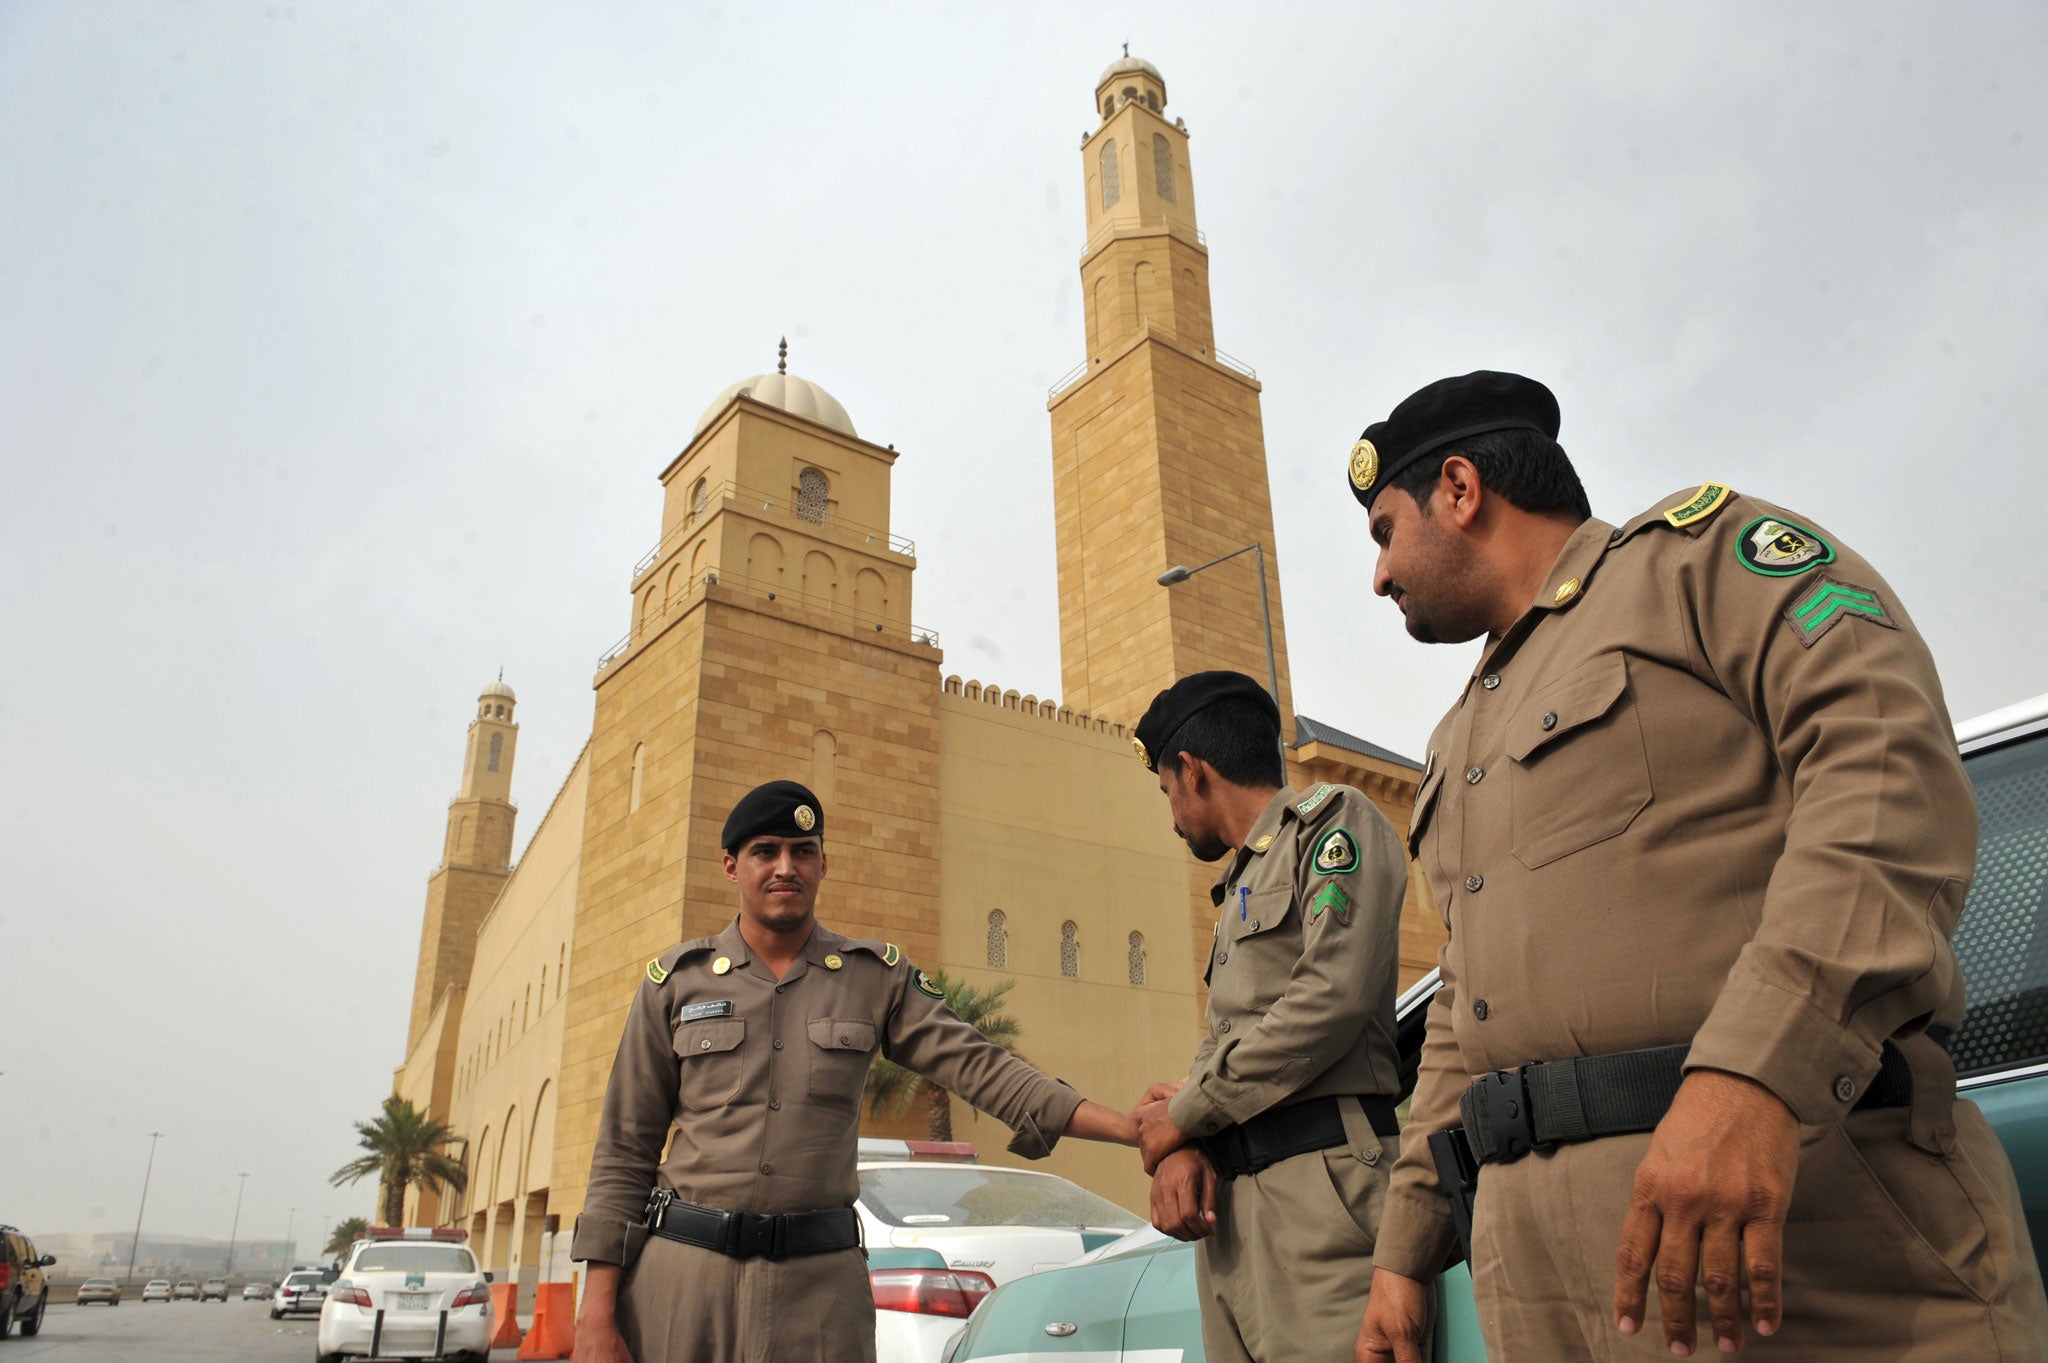 Saudi policemen stand guard in front of 'Al-rajhi mosque' in central Riyadh on March 11, 2011 as Saudi Arabia launched a massive security operation in a menacing show of force to deter protesters from a planned 'Day of Rage' to press for democratic reform